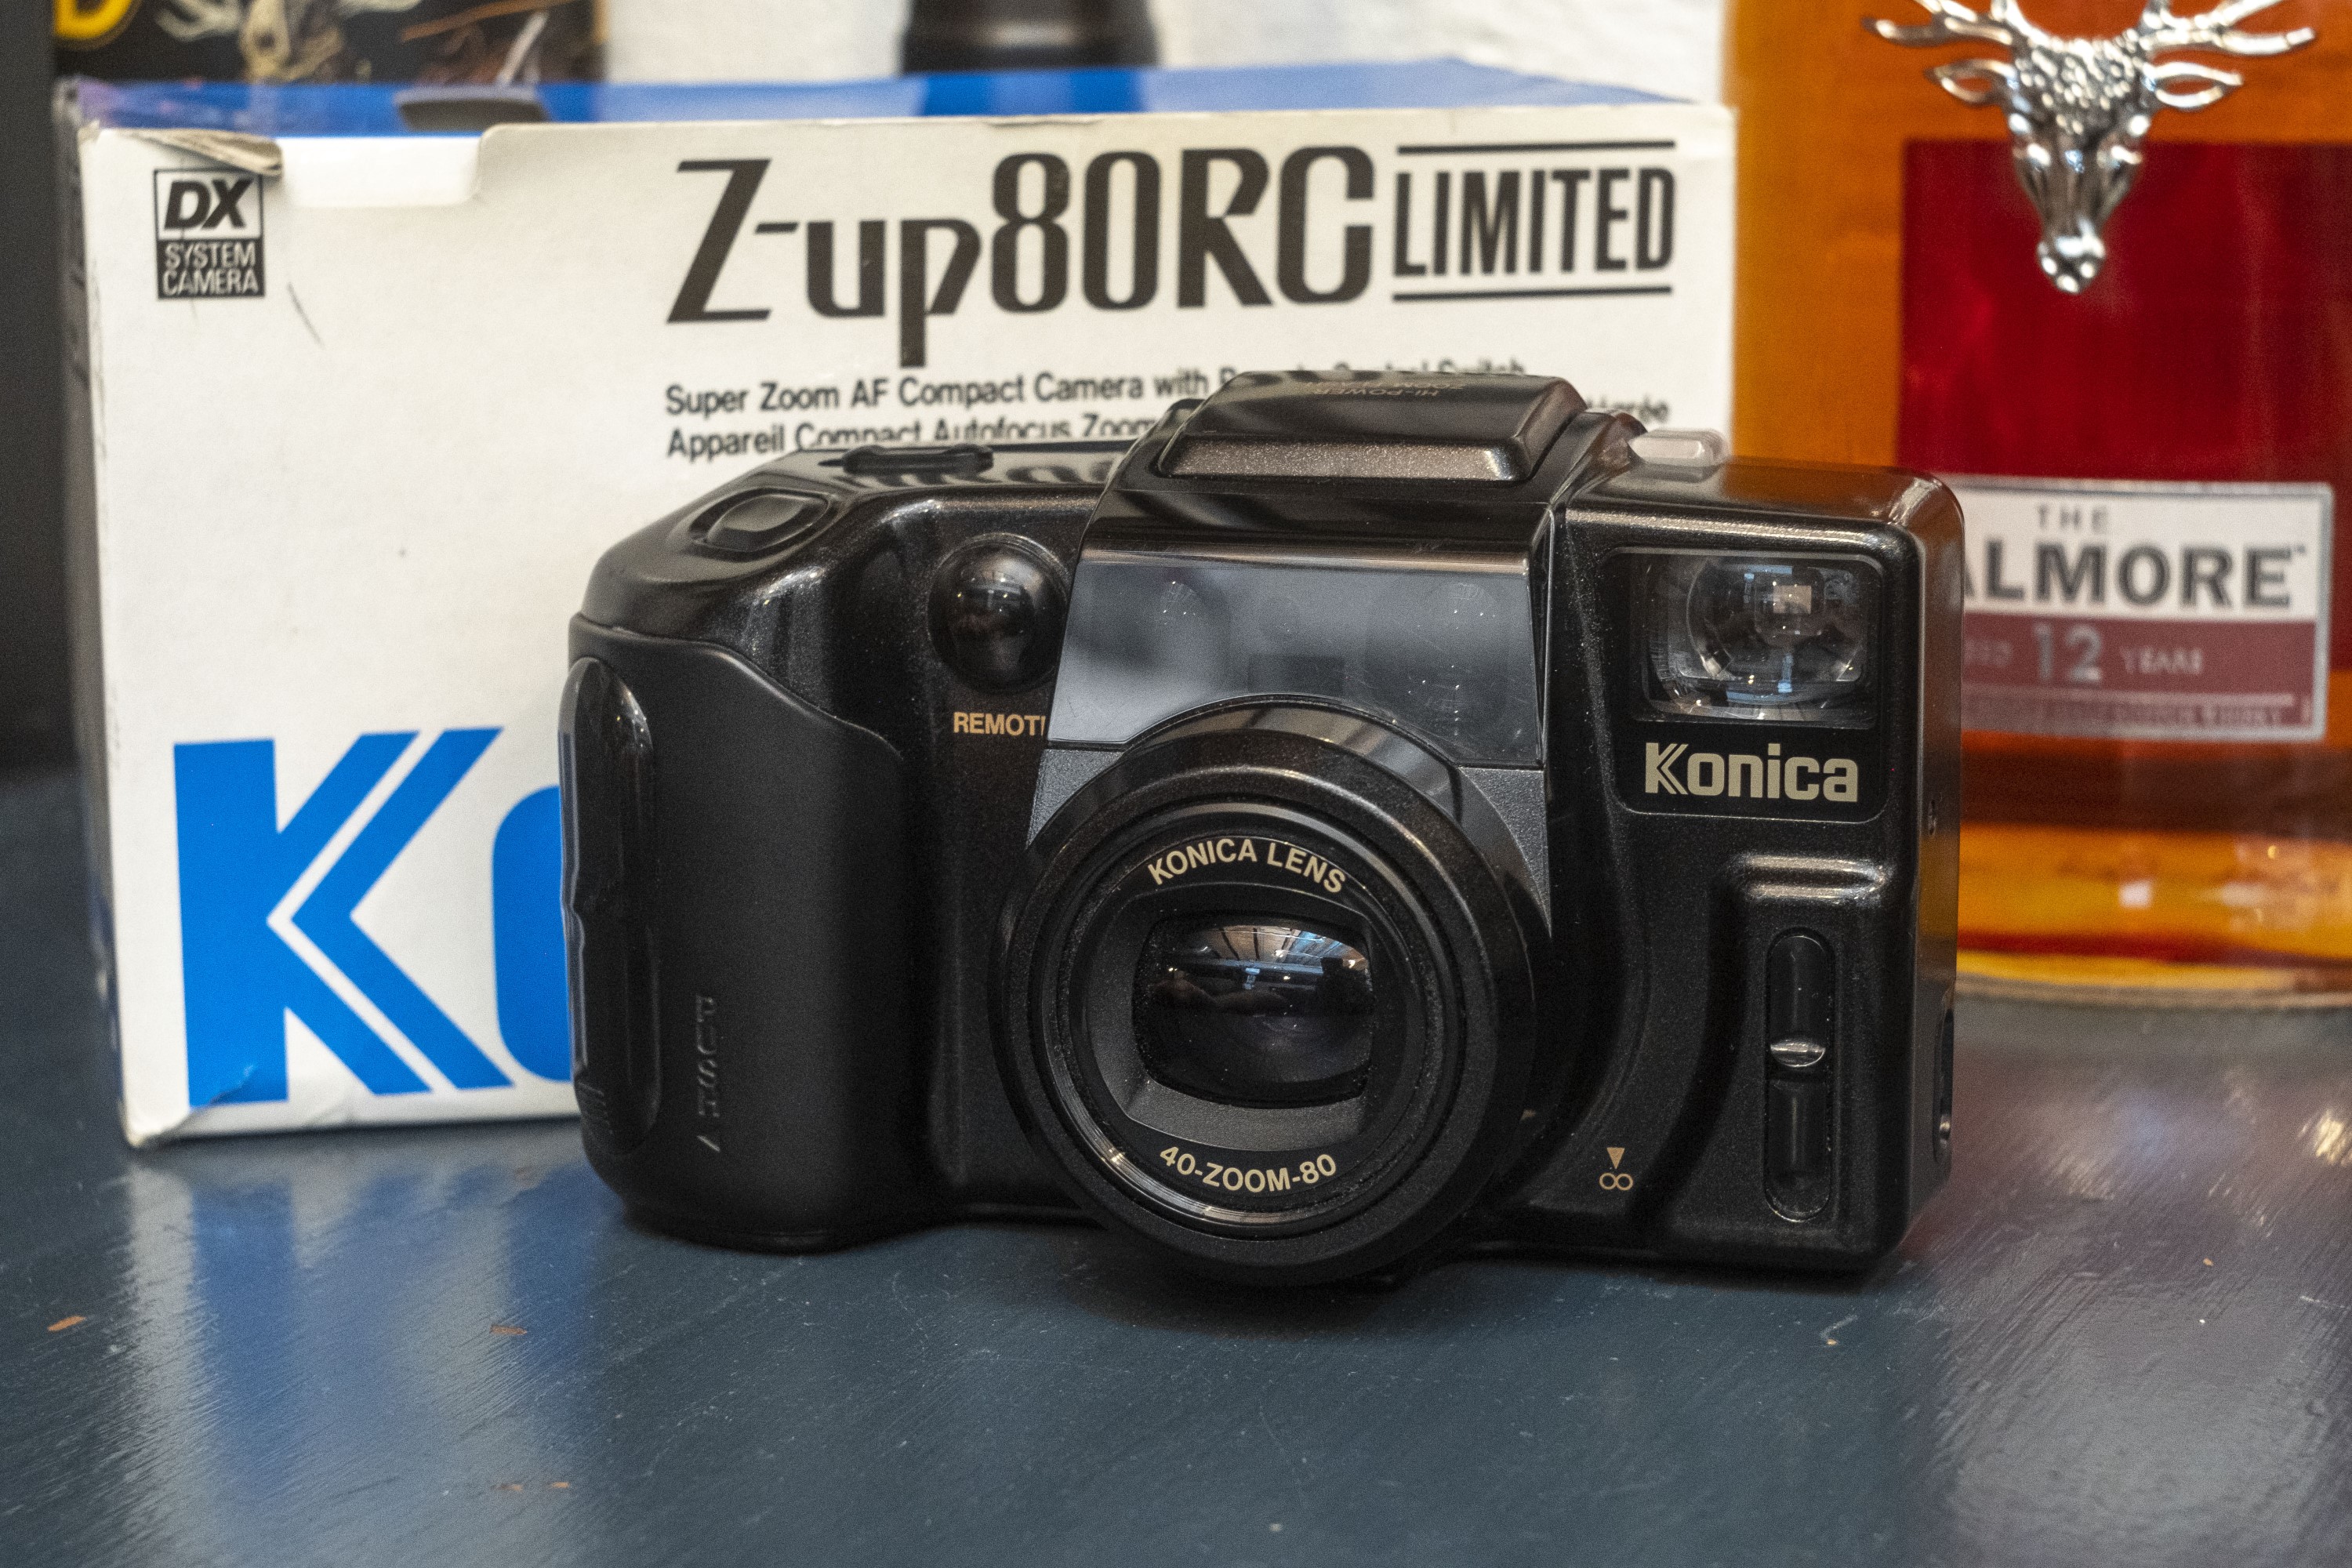 Konica Z-Up 80RC Limited (1989)